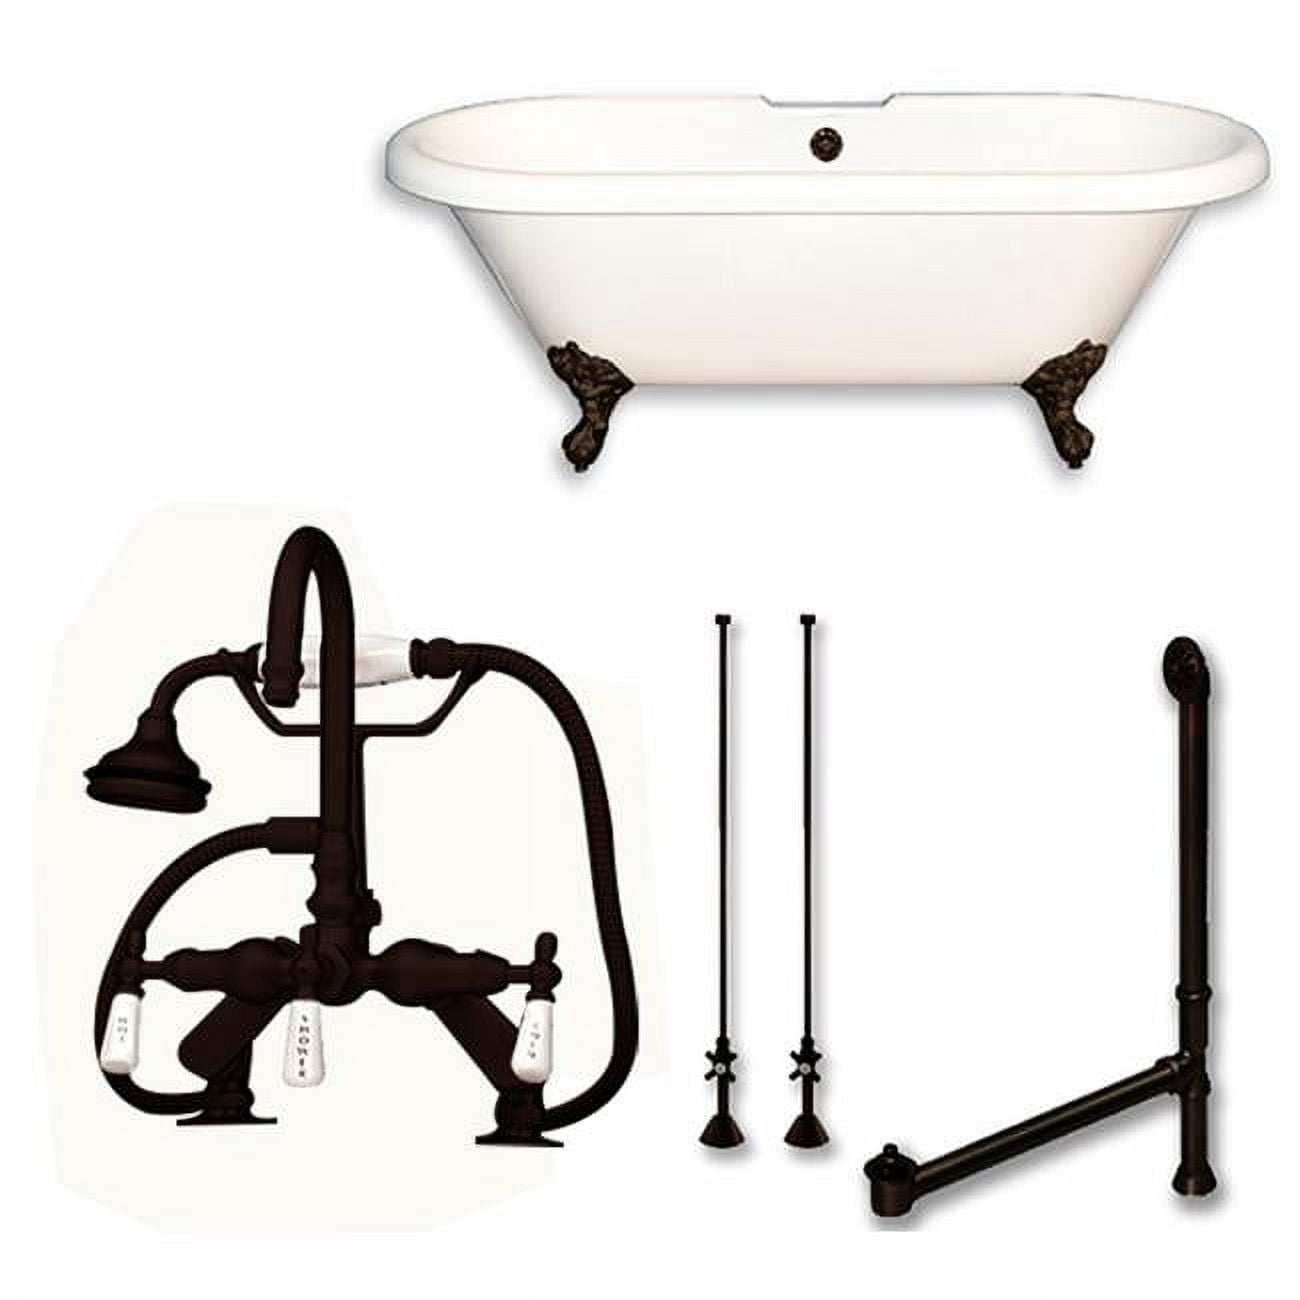 Ade60-684d-pkg-orb-7dh 60 X 30 In. Acrylic Double Ended Clawfoot Bathtub With 7 In. Deck Mount Faucet Drillings & Oil Rubbed Bronze Plumbing